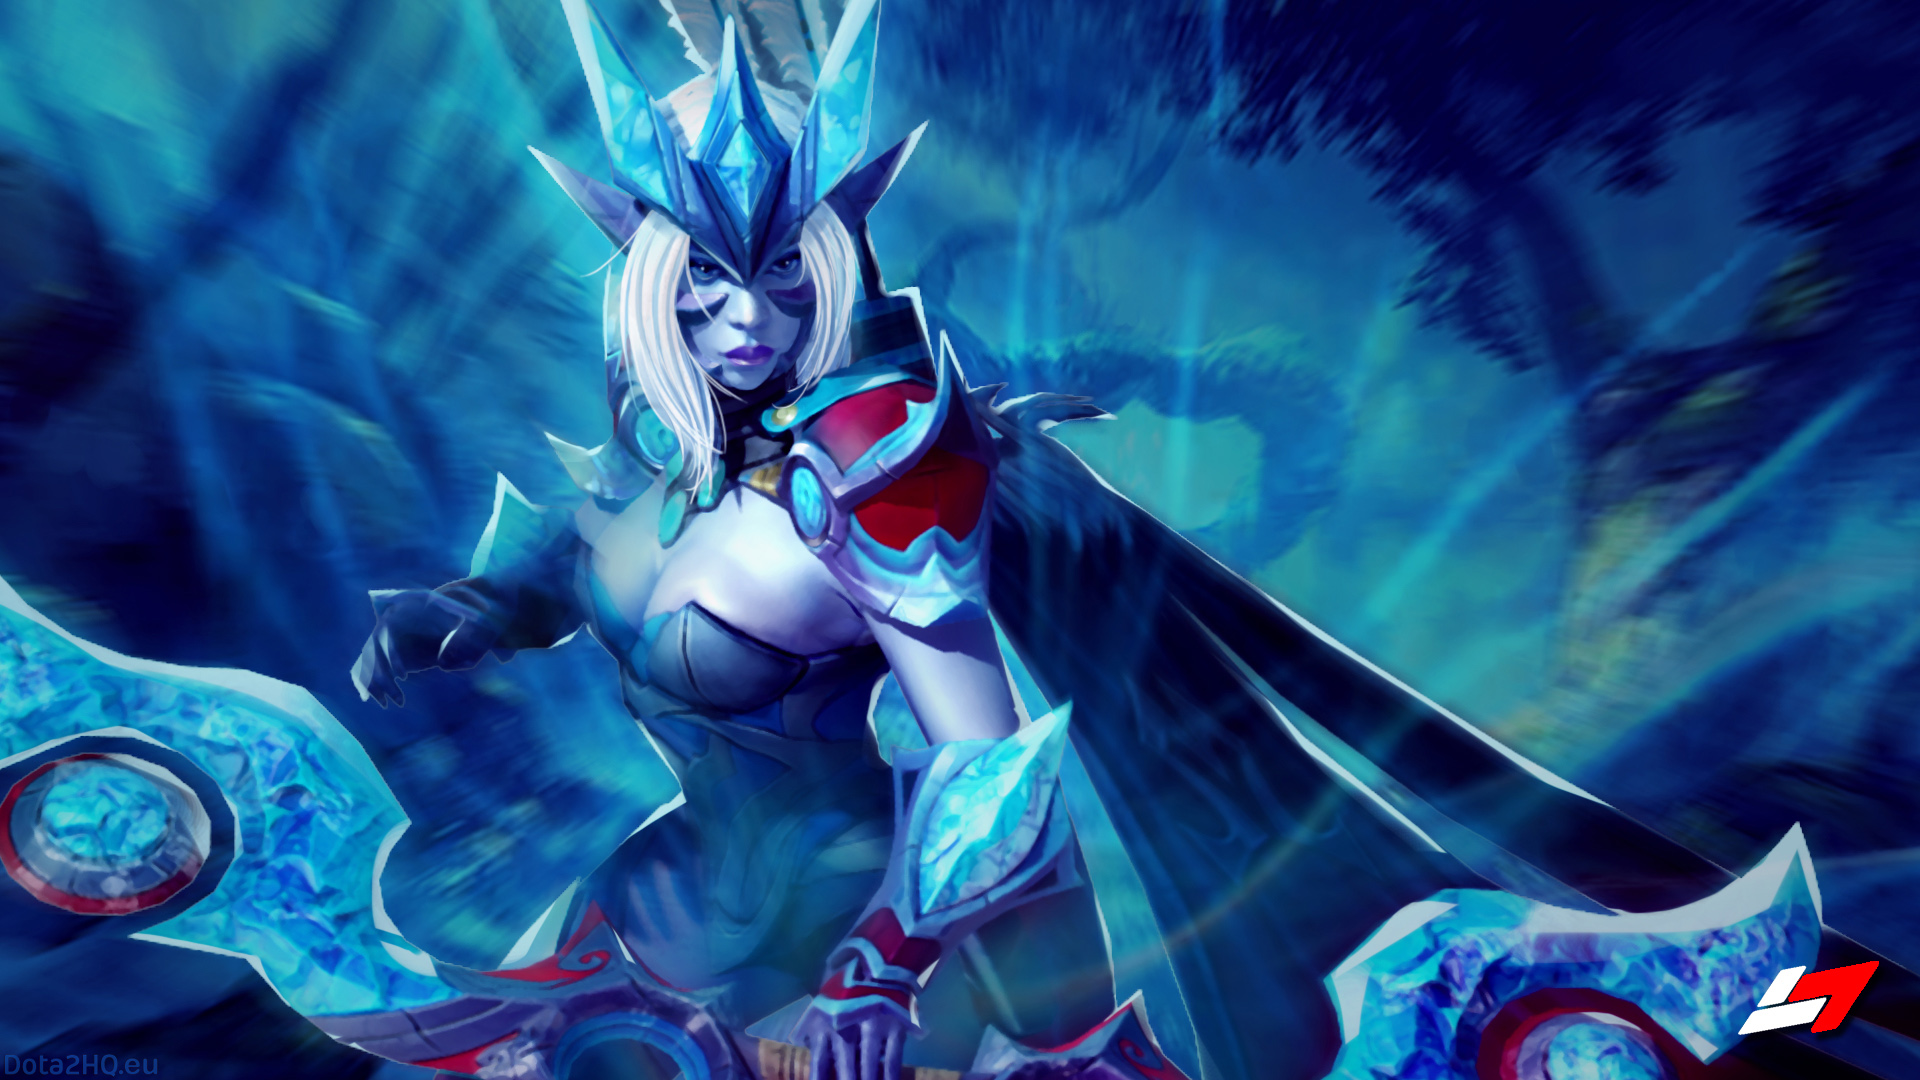 Drow Ranger Wallpaper (Frost Crystal set) - DOTA 2 Game Wallpapers Gallery